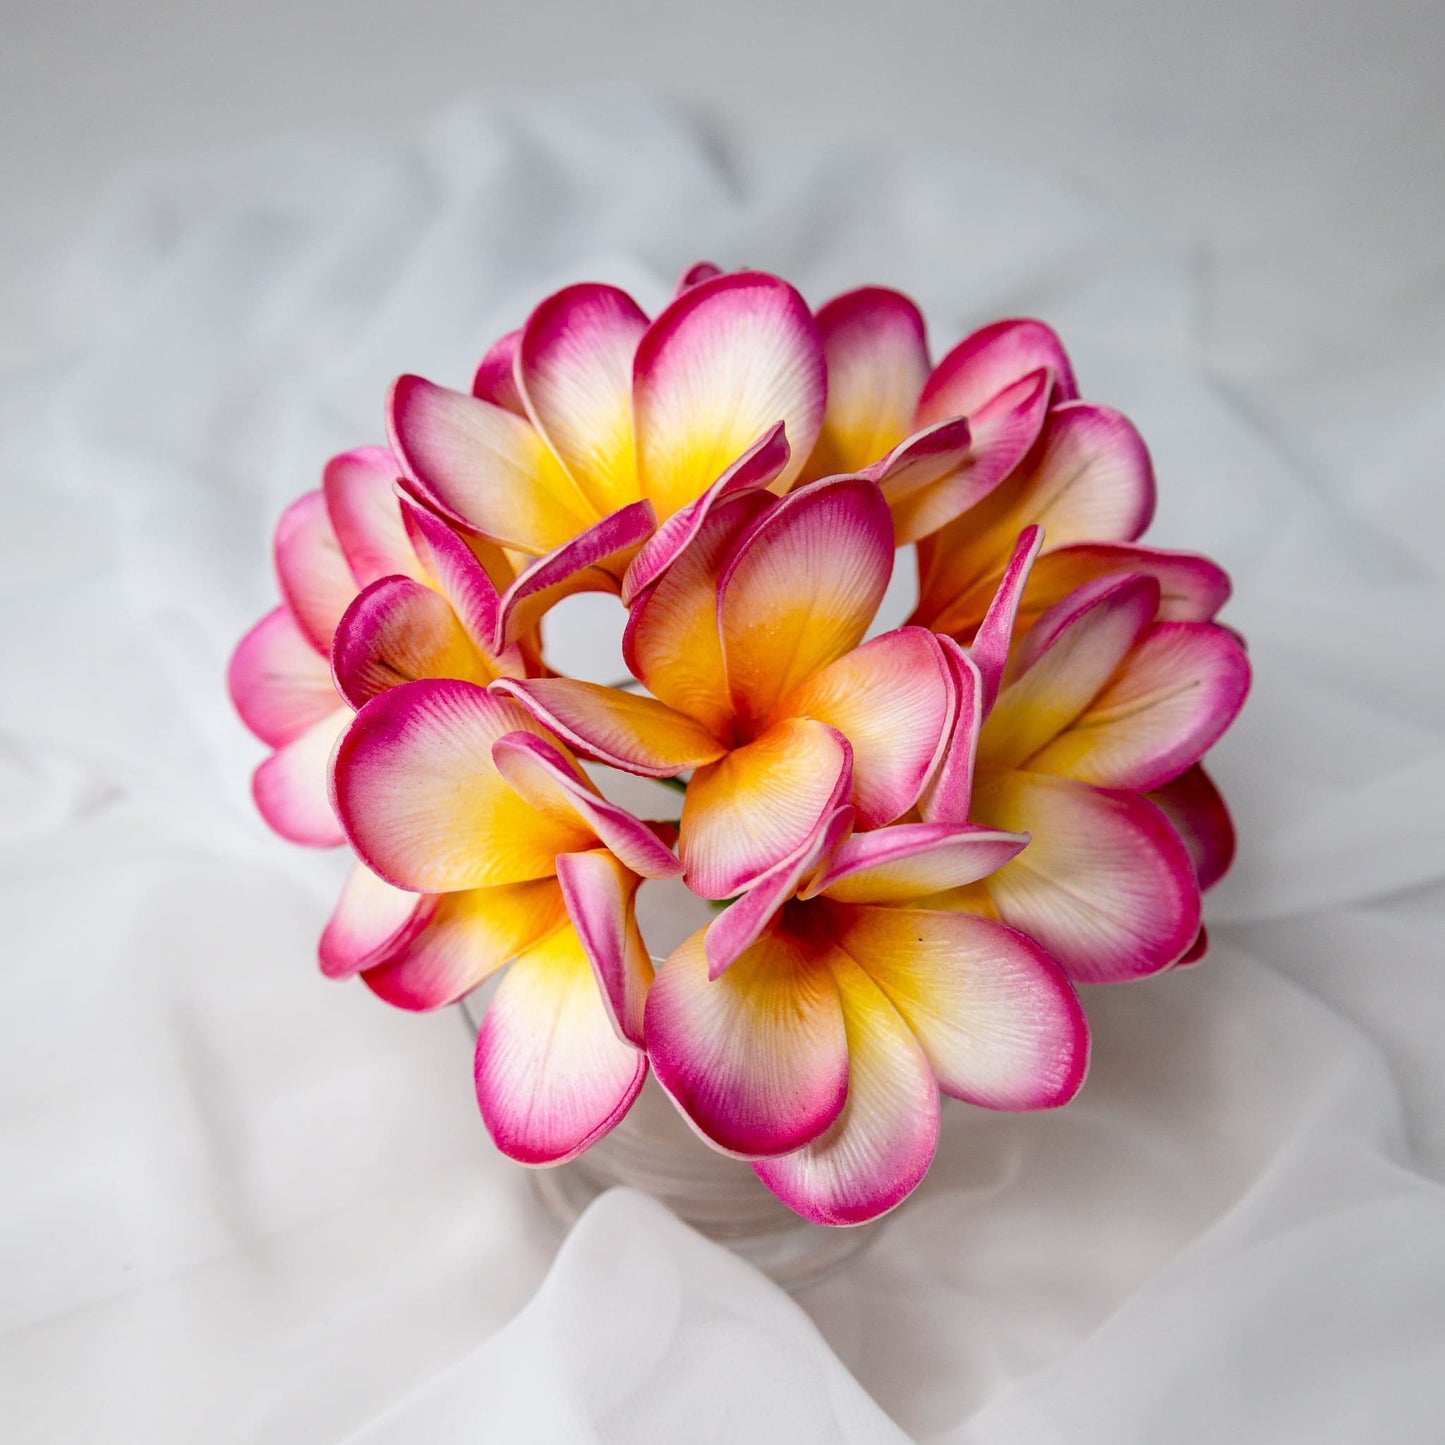 artificial Sunset Pink Frangipani Flowerheads in clear vase top view